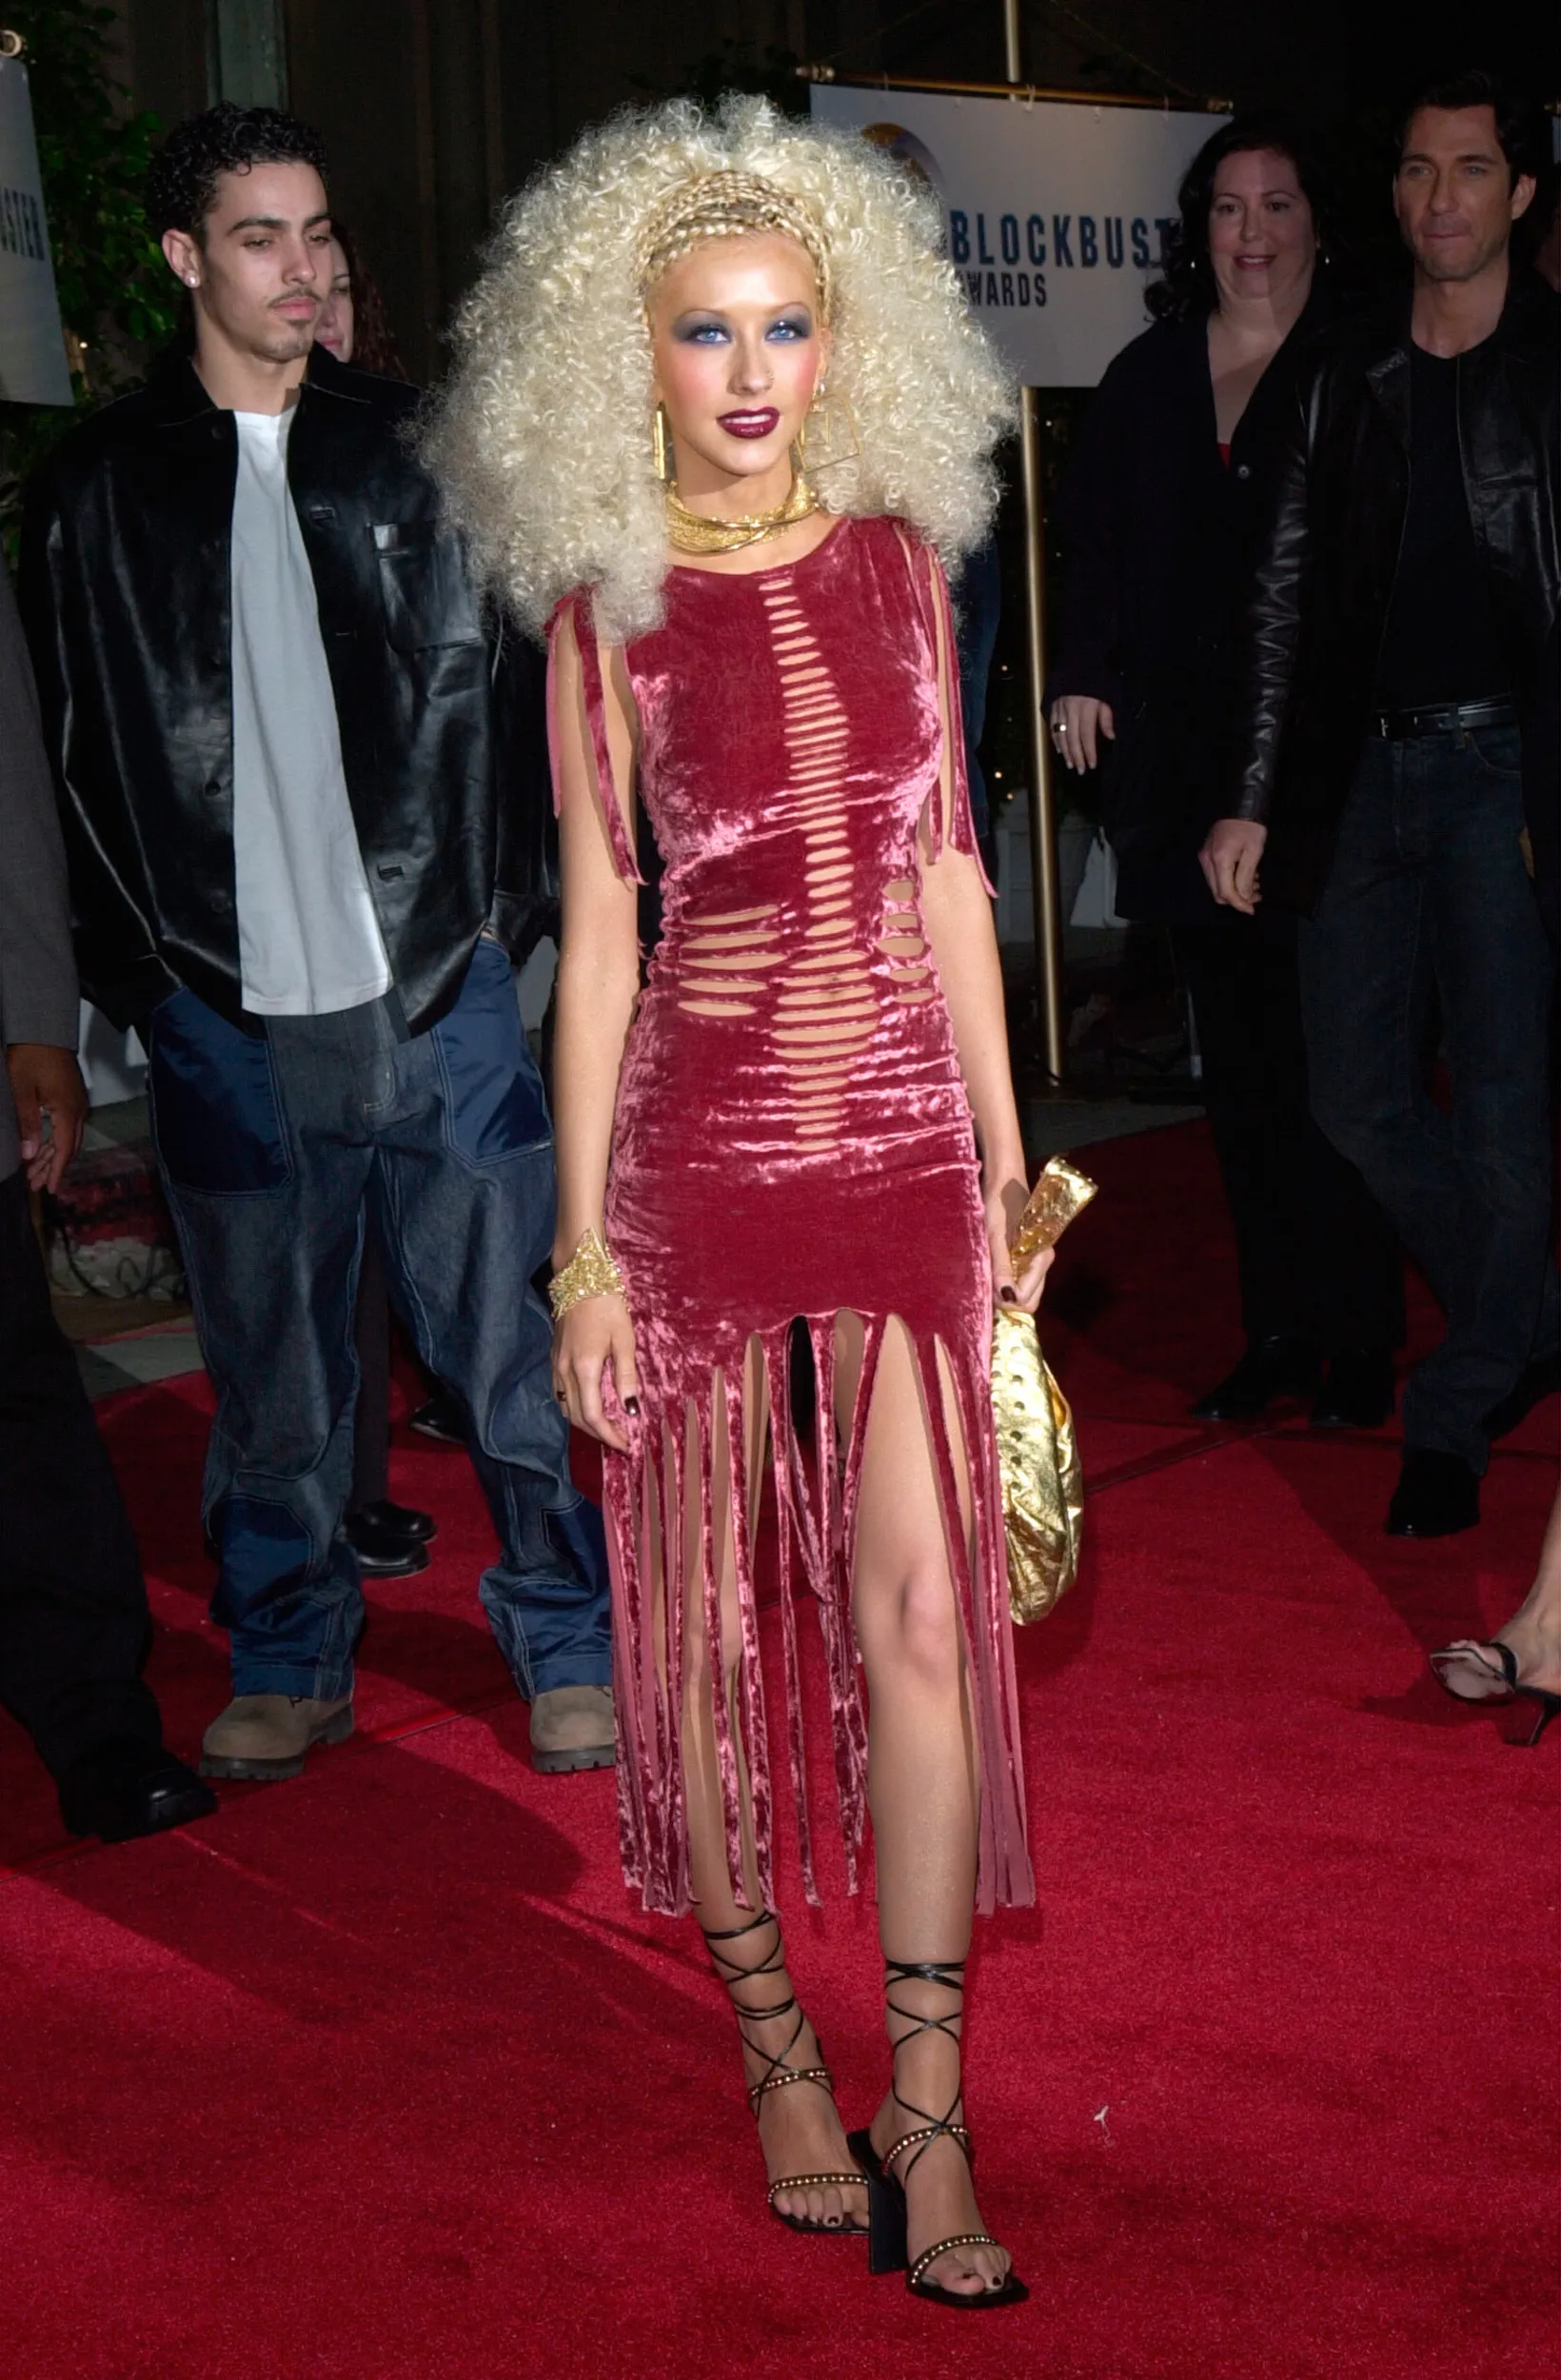 The Unexpected Red Carpet Dresses Of Year’s Past